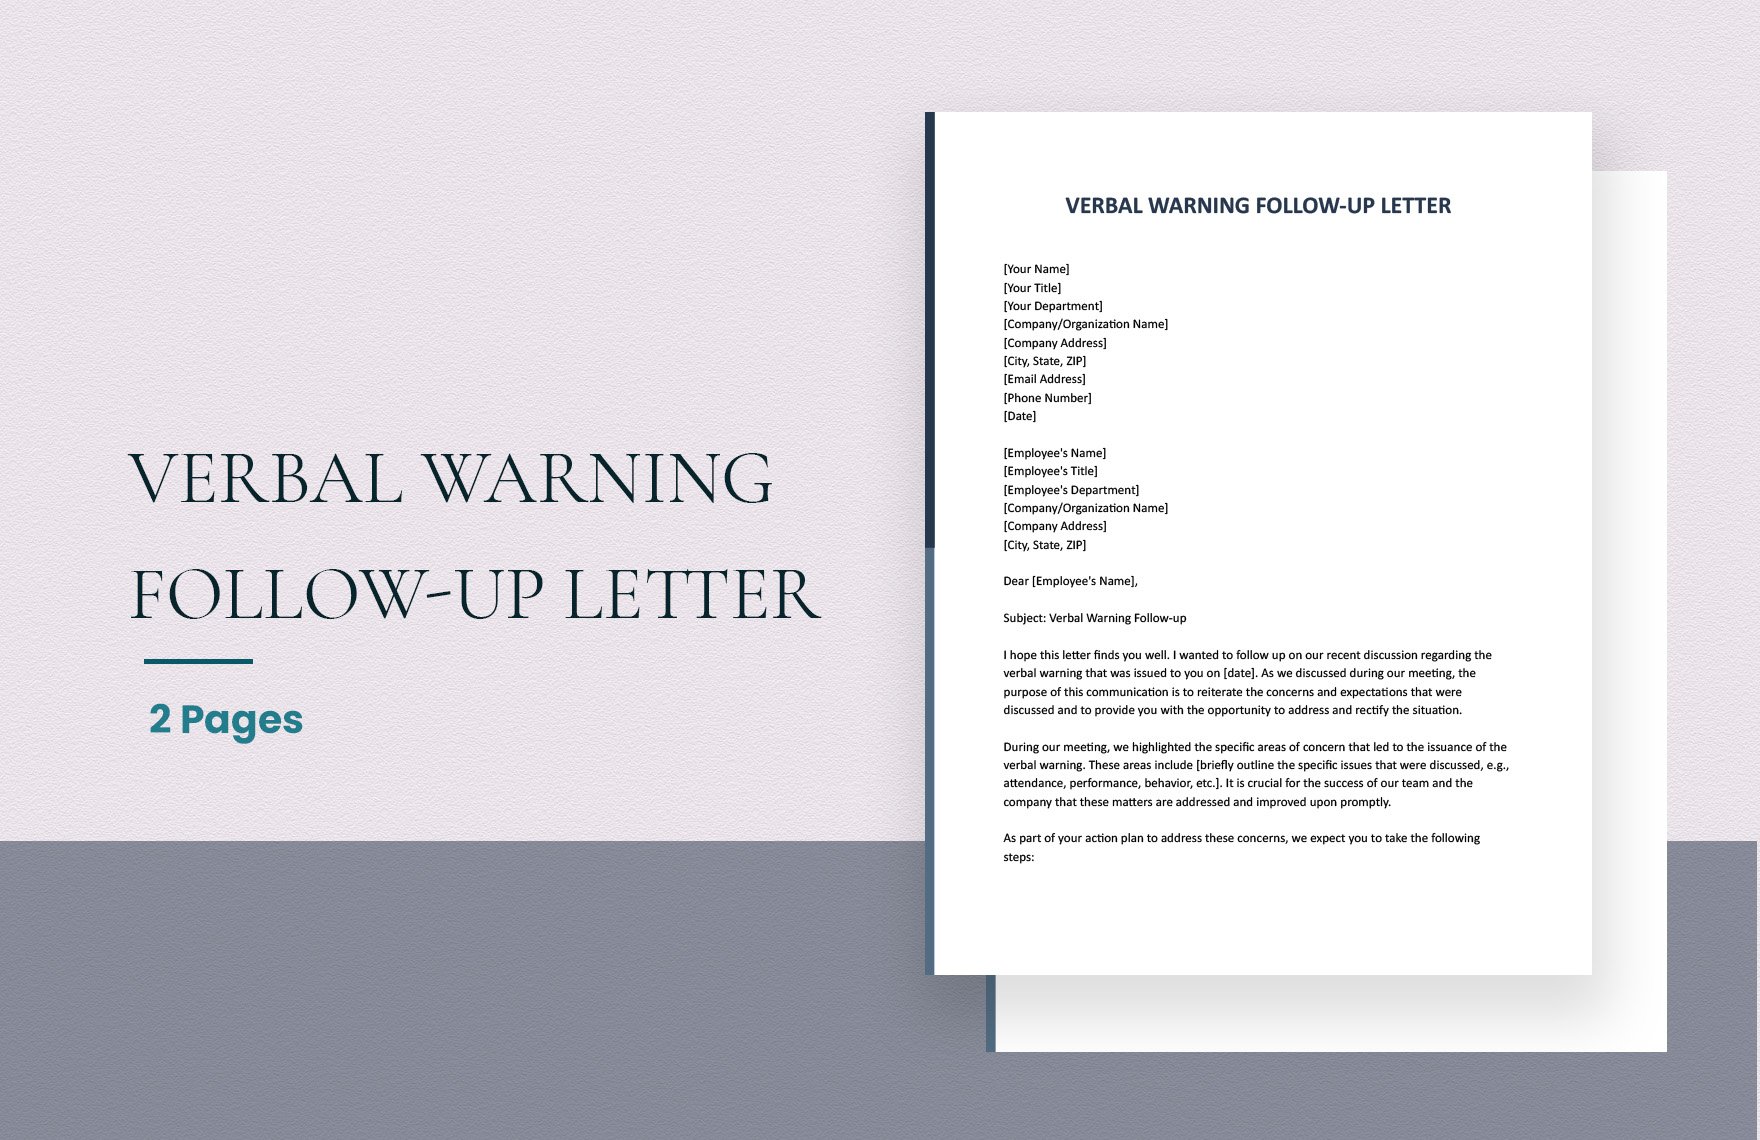 Verbal Warning Follow-Up Letter